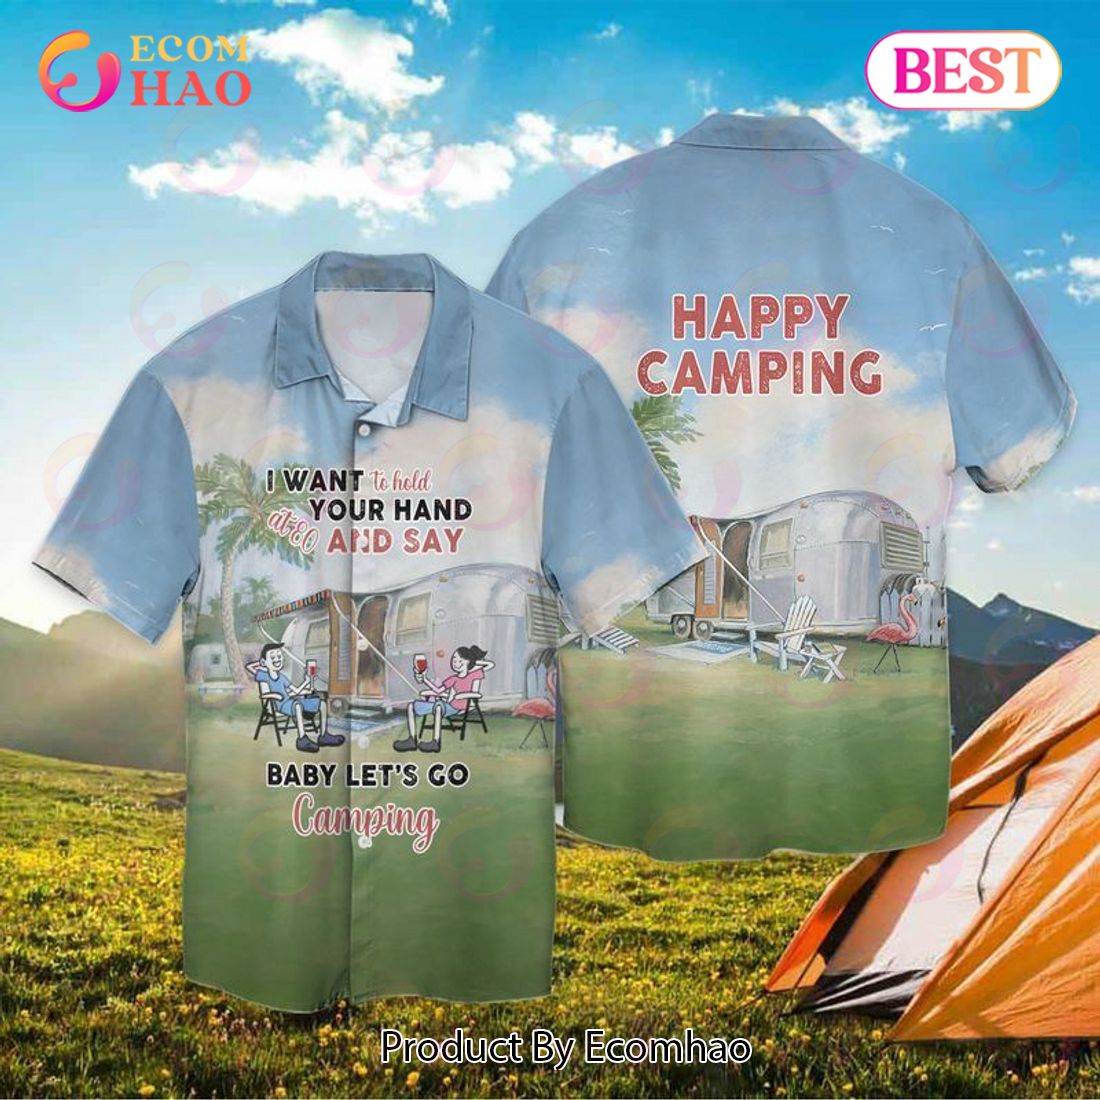 Let’s Camping I Want To Hold Your Hand At 80 And Say Baby Let’s Go Camping Hawaiian Shirt